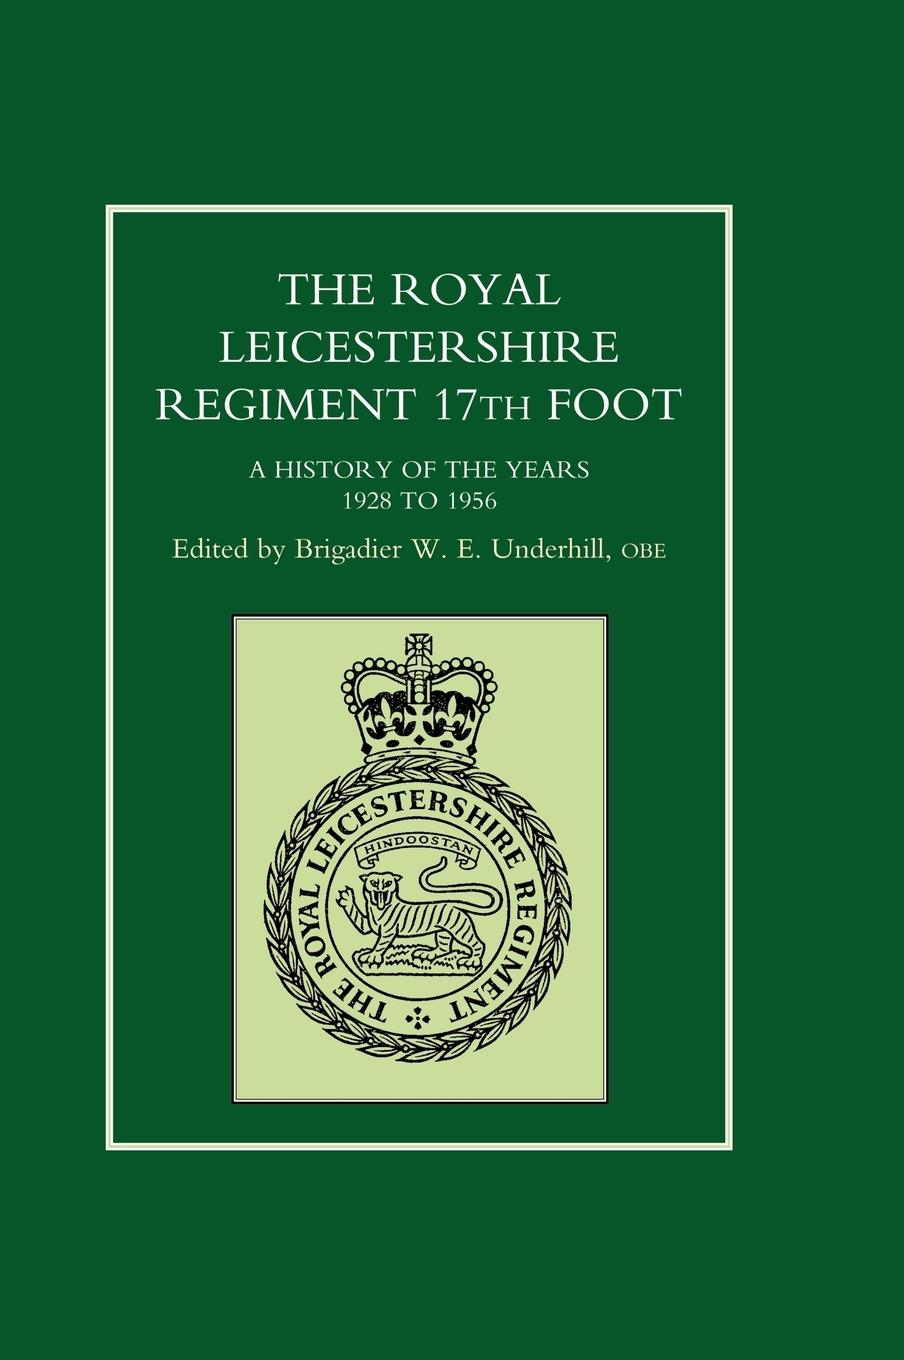 ROYAL LEICESTERSHIRE REGIMENT, 17TH FOOT A history of the years 1928 to 1956. - Ed Brig W. E. Underhill